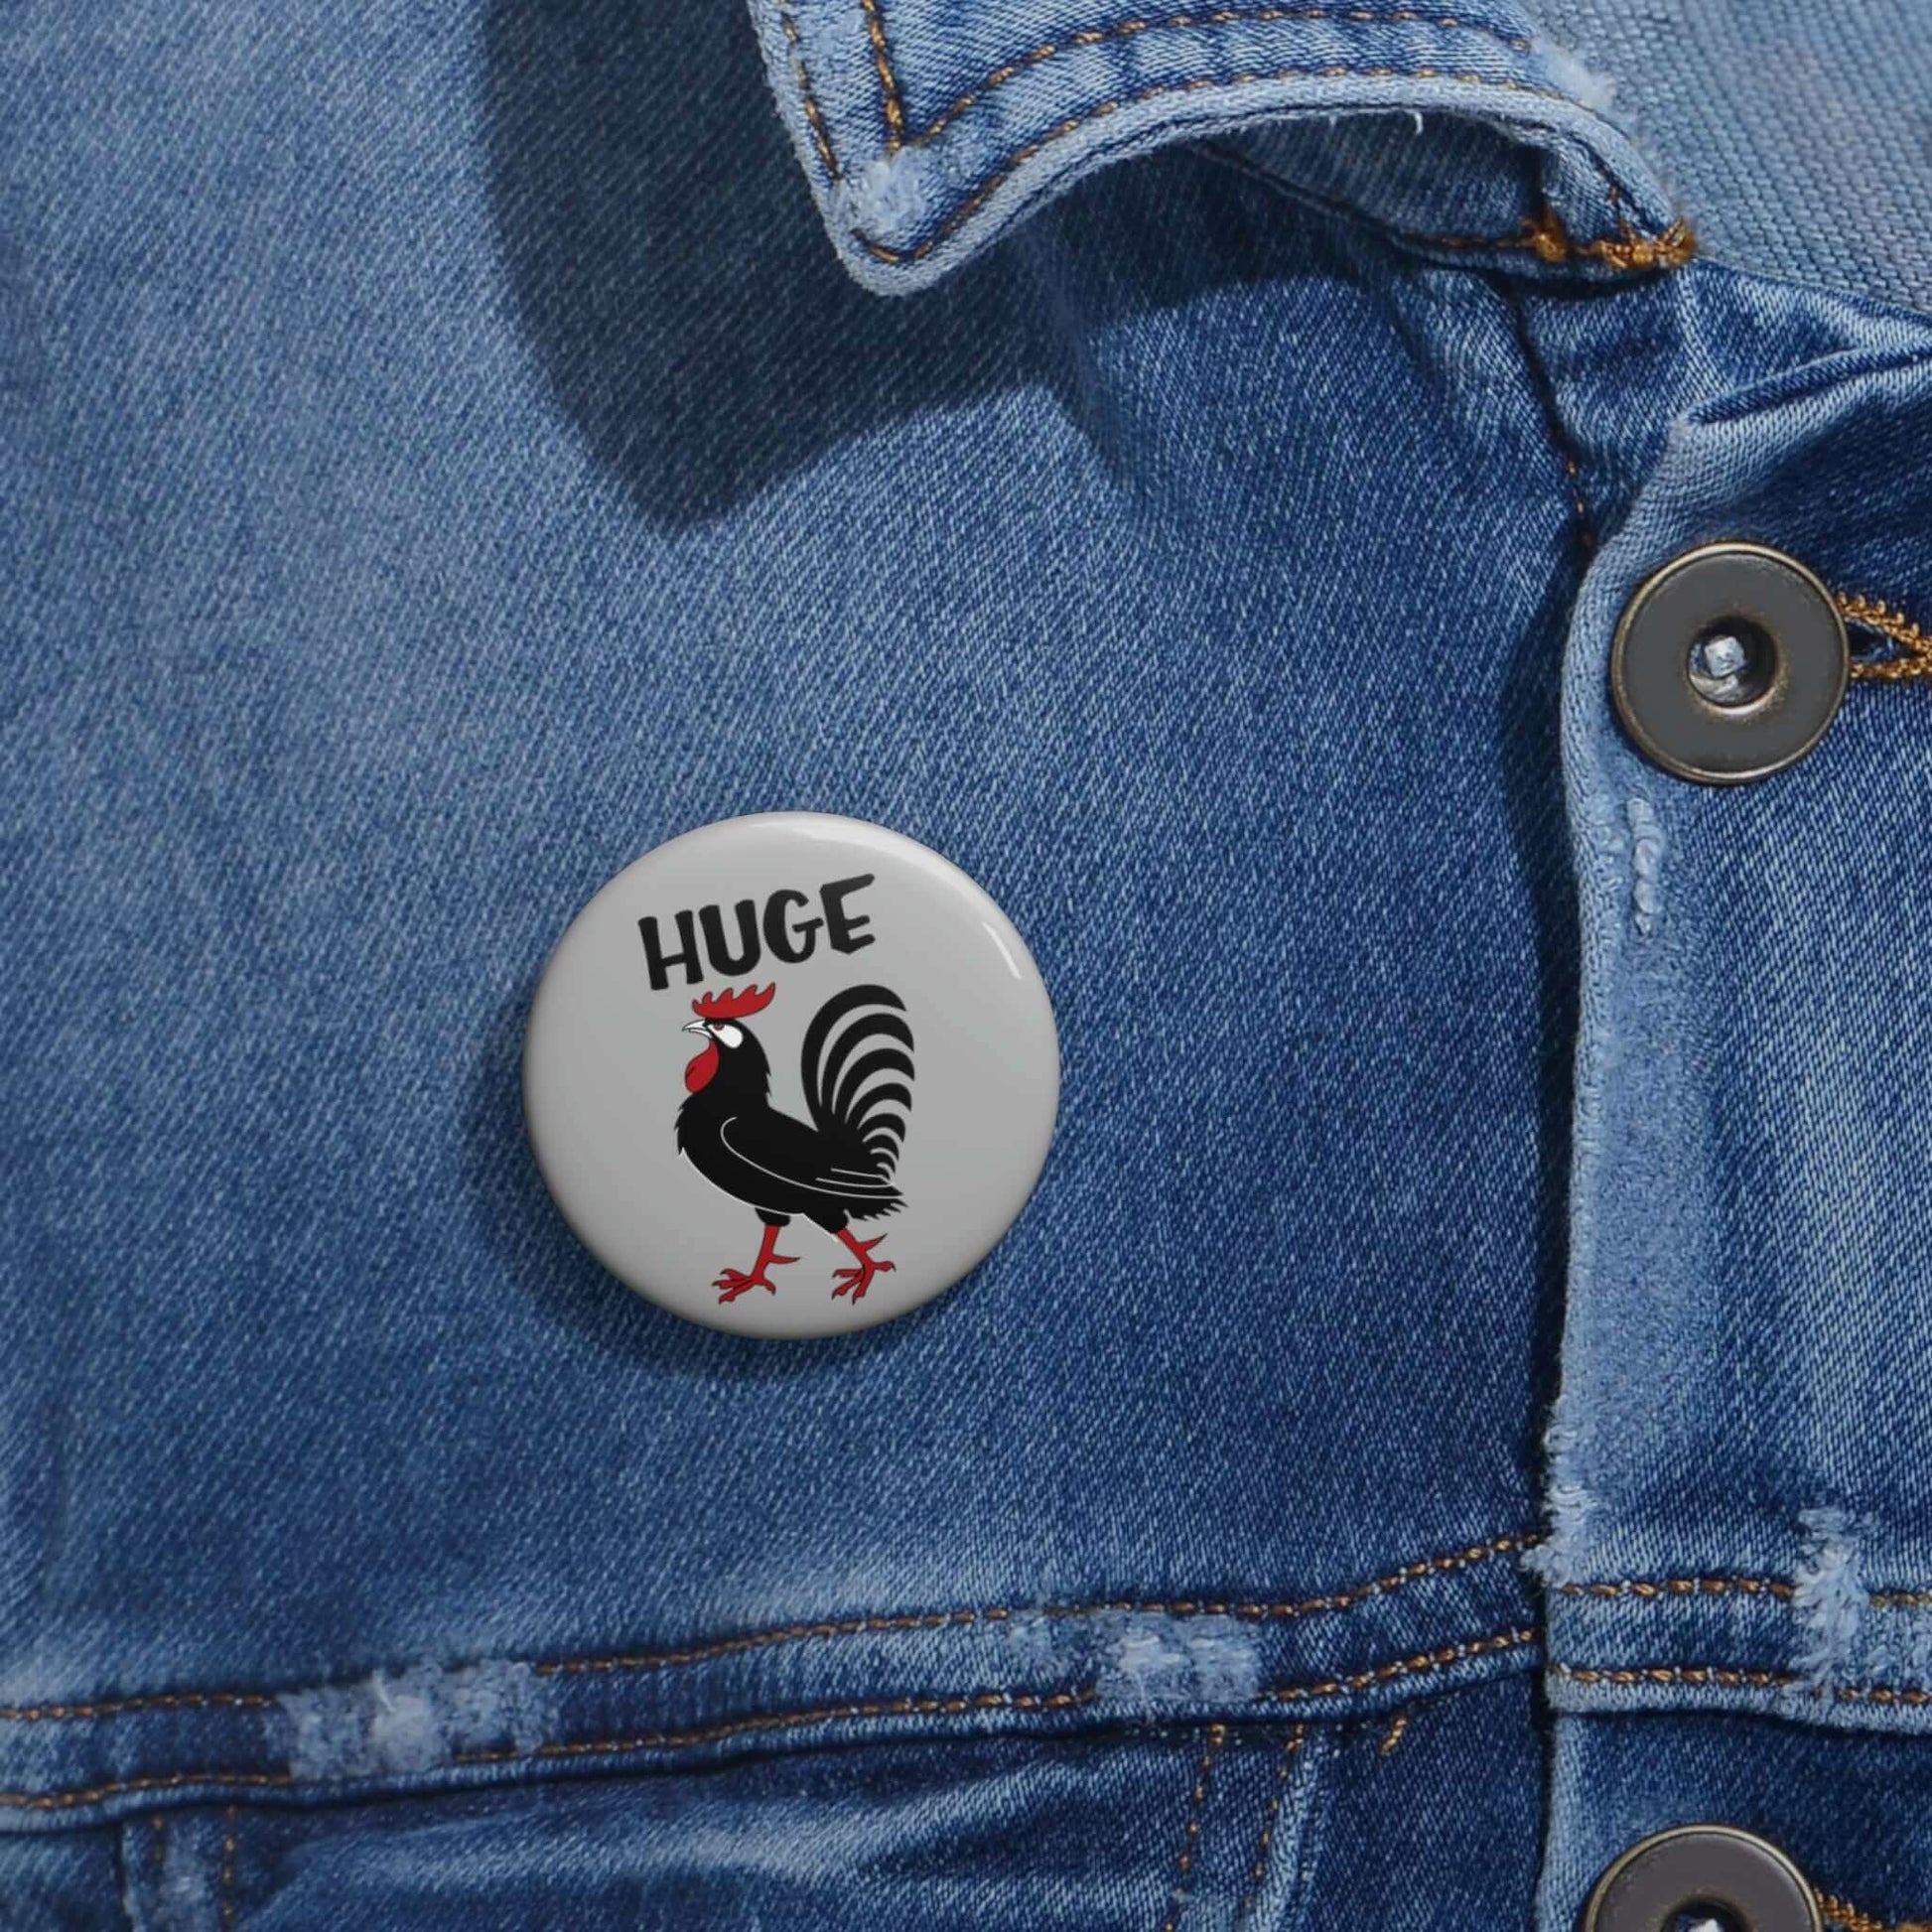 Grey pinback button with image of a rooster with the word Huge above the rooster.